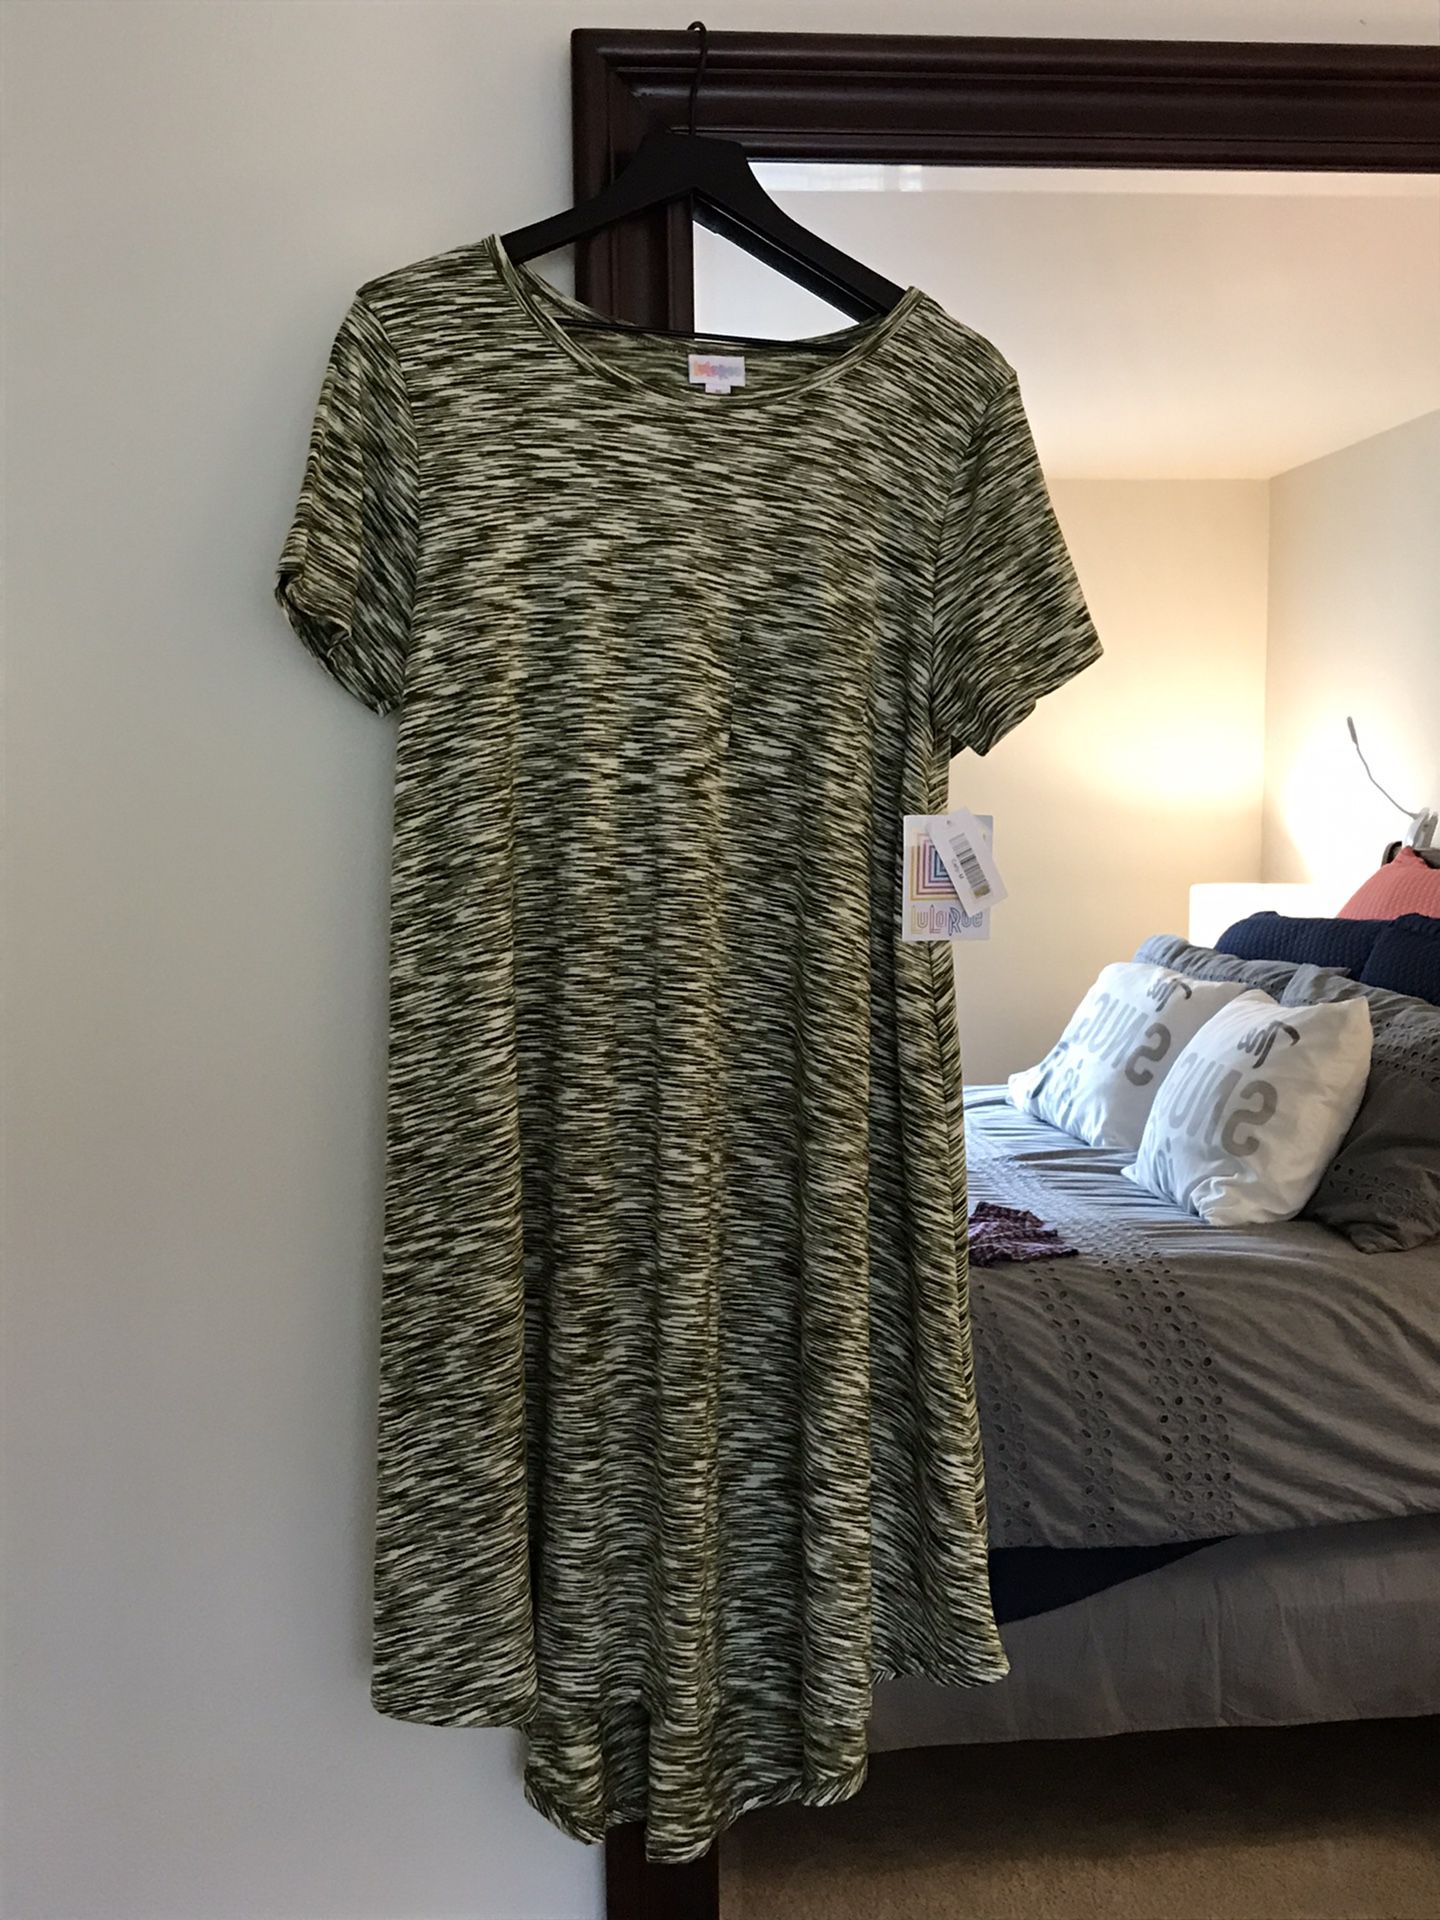 NEW-LuLaRoe Carly Dress-New with tag